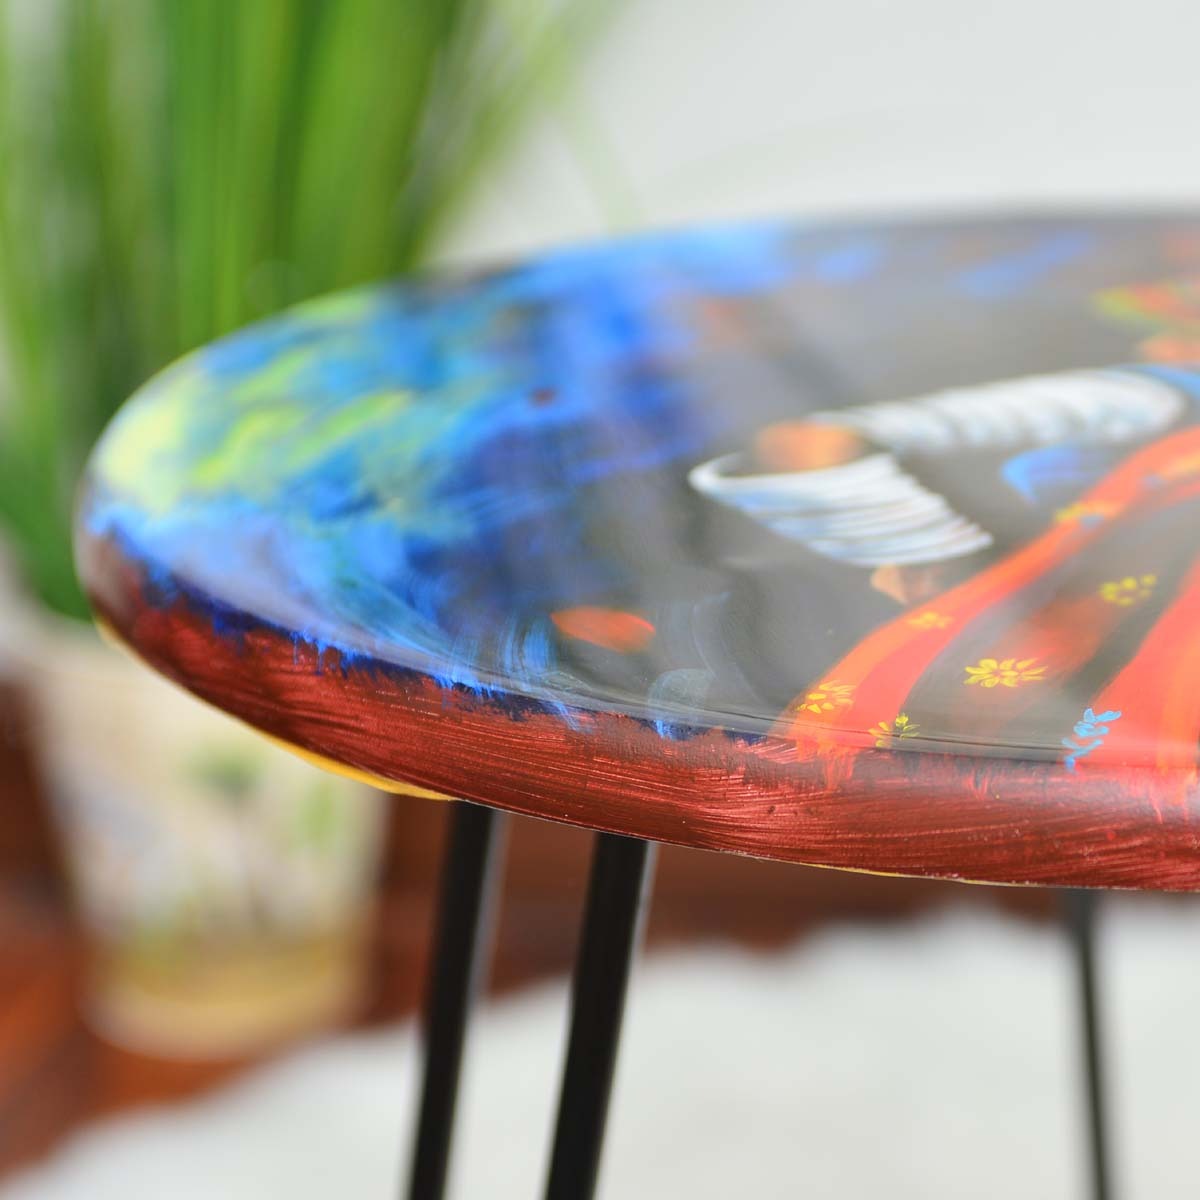 Gypsy Trad Living Lounge Center Side Hairpin Table - waseeh.com